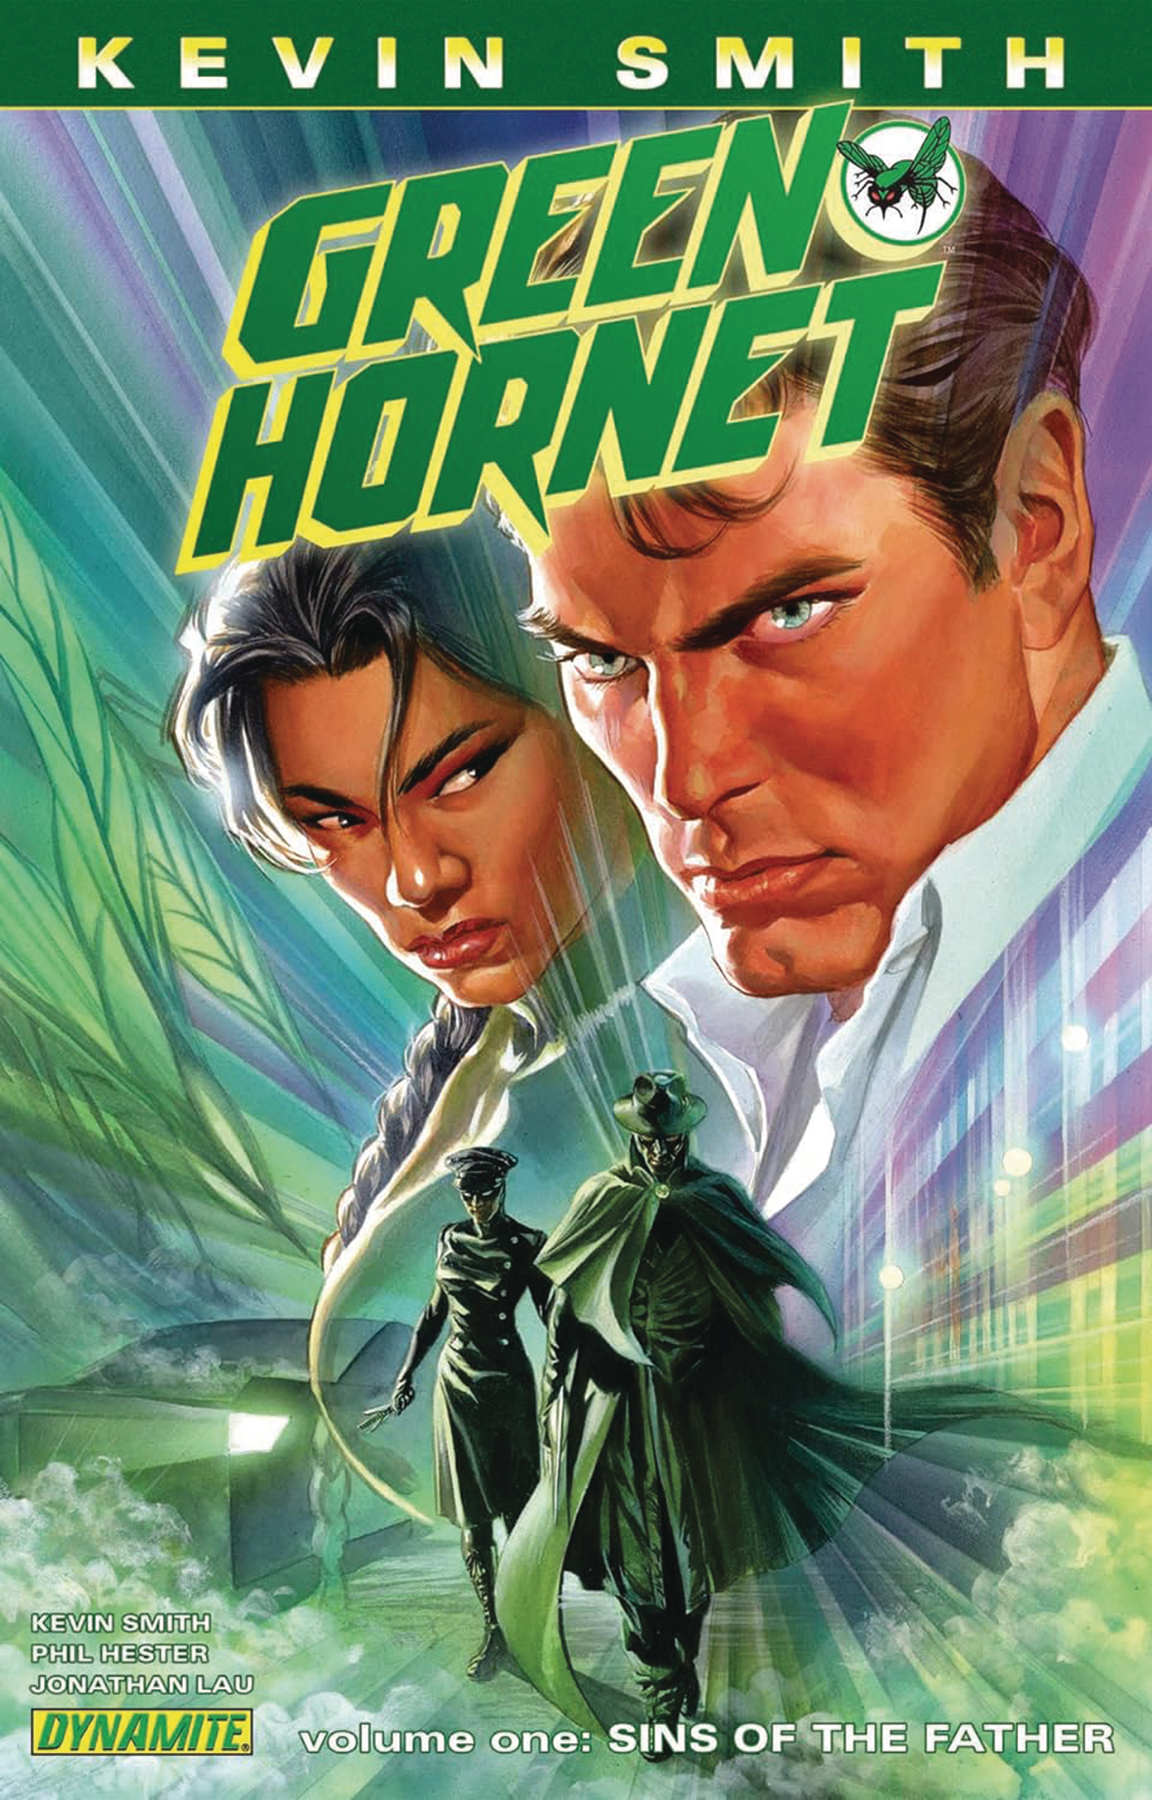 Kevin Smith Green Hornet Graphic Novel Volume 1 Sins of the Father